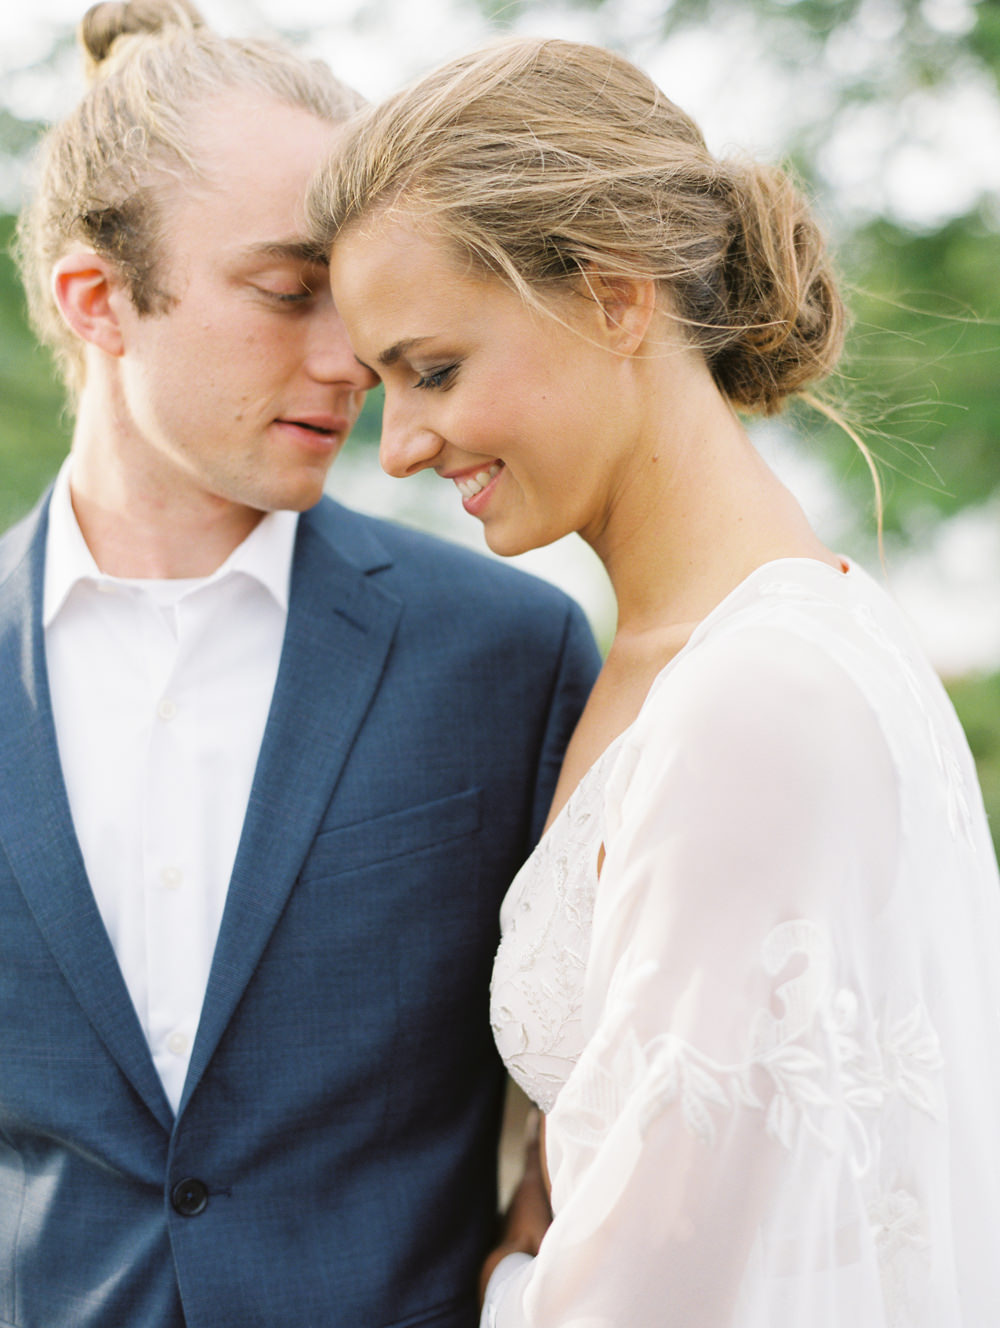 natural wedding makeup easy wedding hair for adirondack island elopement by Mary Dougherty